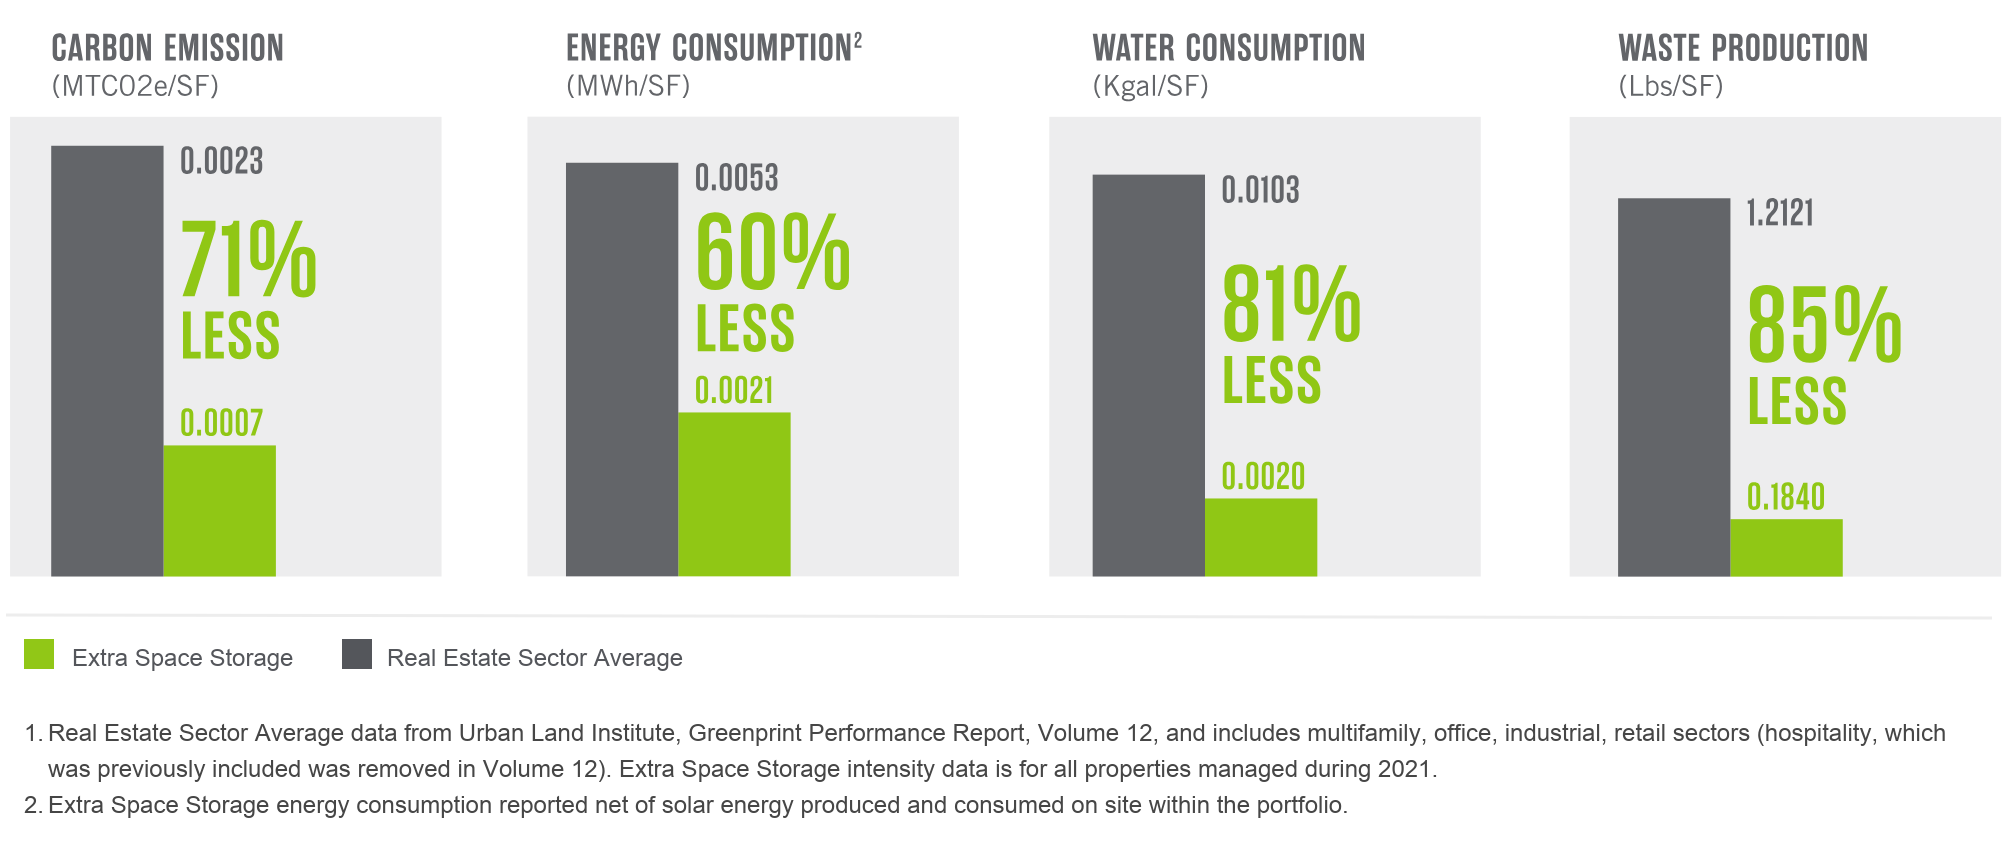 Extra Space Storage Consumption and Emissions